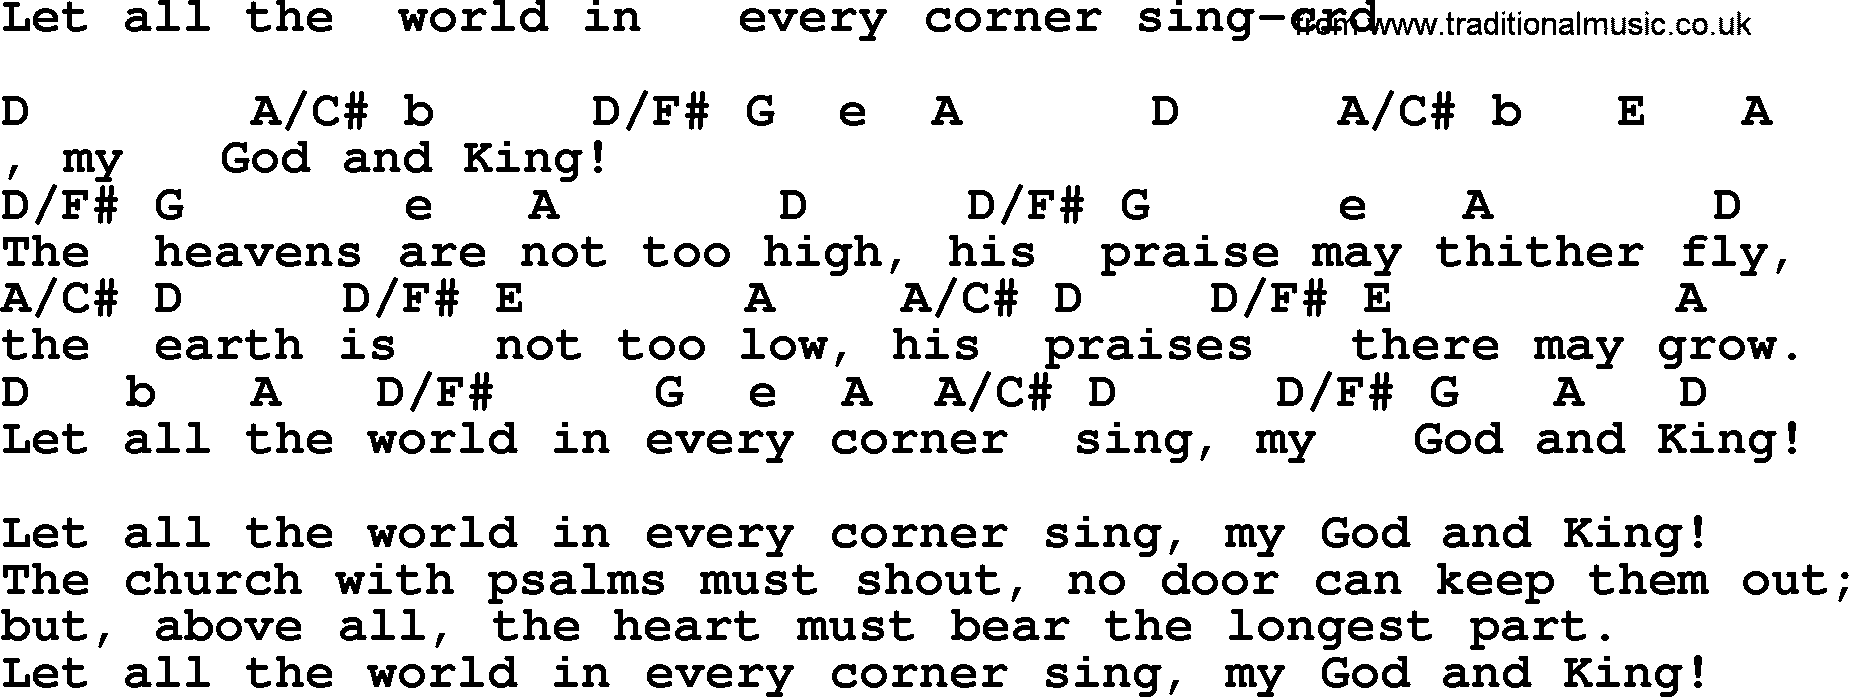 Top 500 Hymn: Let All The  World In   Every Corner Sing, lyrics and chords